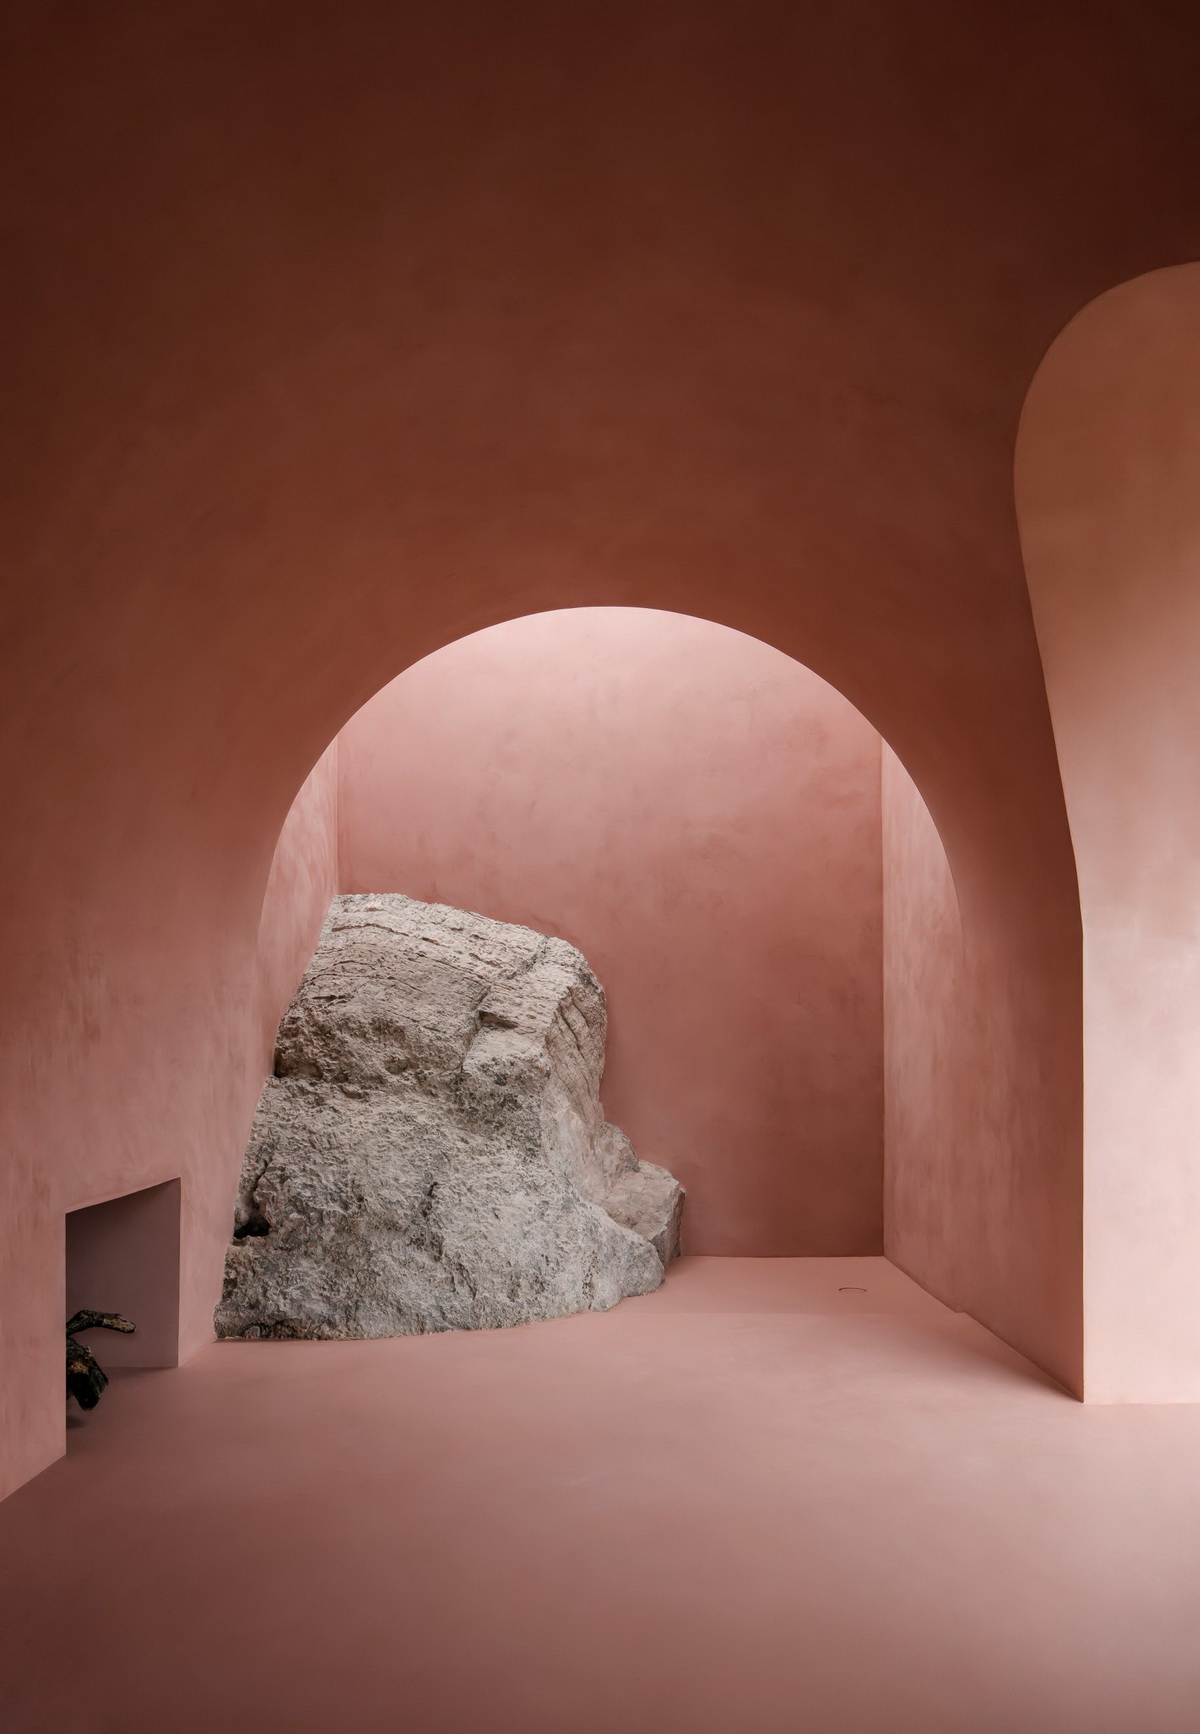 olive-houses-interiors-spain-mar-plus-ask-architecture_dezeen_2364_col_5-scaled_调整大小.jpg